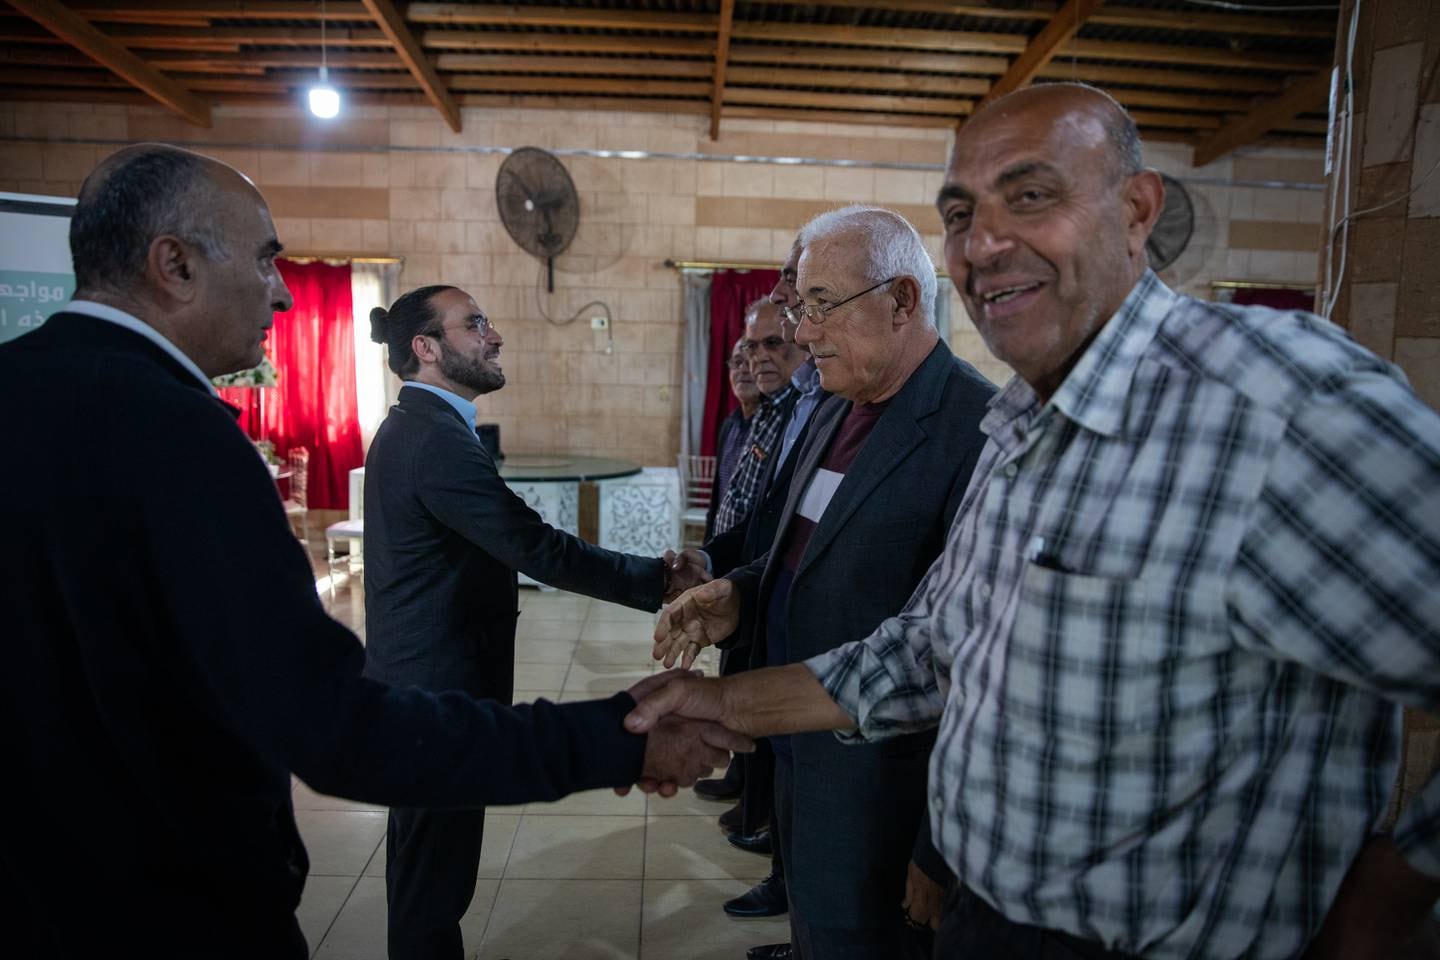 LEBANON: Saturday 16 April 2022  Ali Khalifeh, Shiite opposition candidate for Al-Zahrani in Southern Lebanon, greets supporters in the restaurant hall in Sarafand where an opposition rally is being hosted. Oliver Marsden